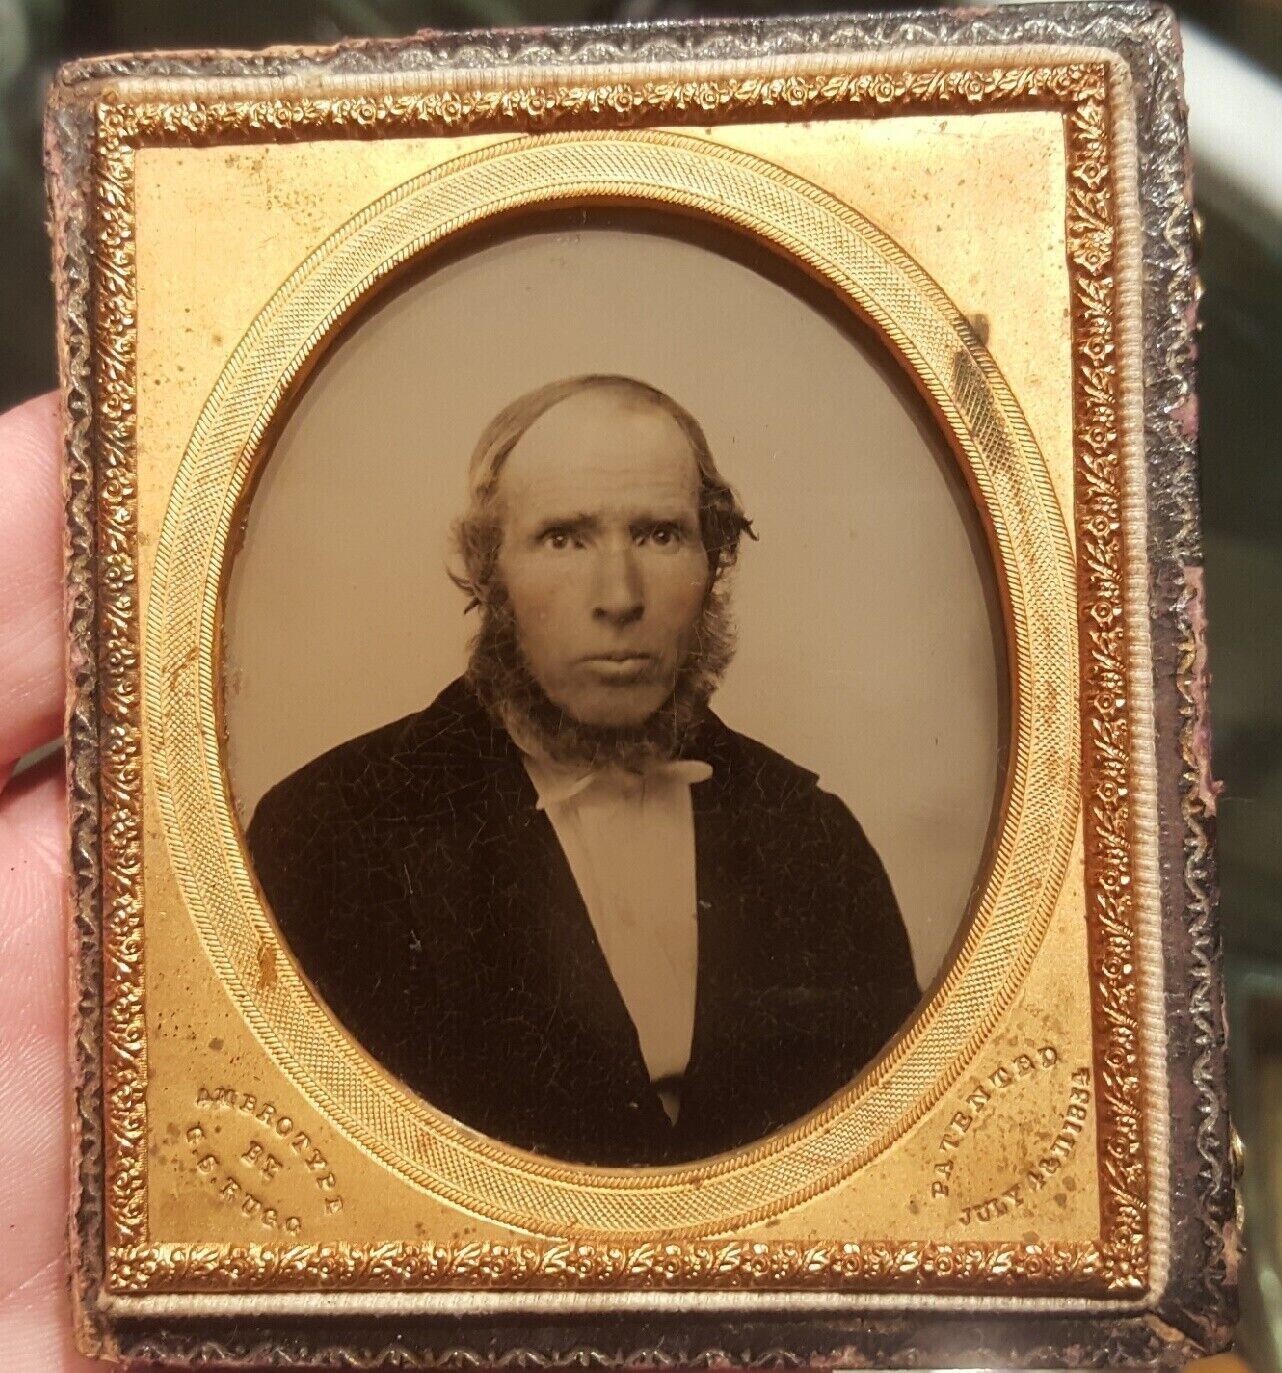 Sixth plate ambrotype of bald man signed on mat by G. S. Rugg